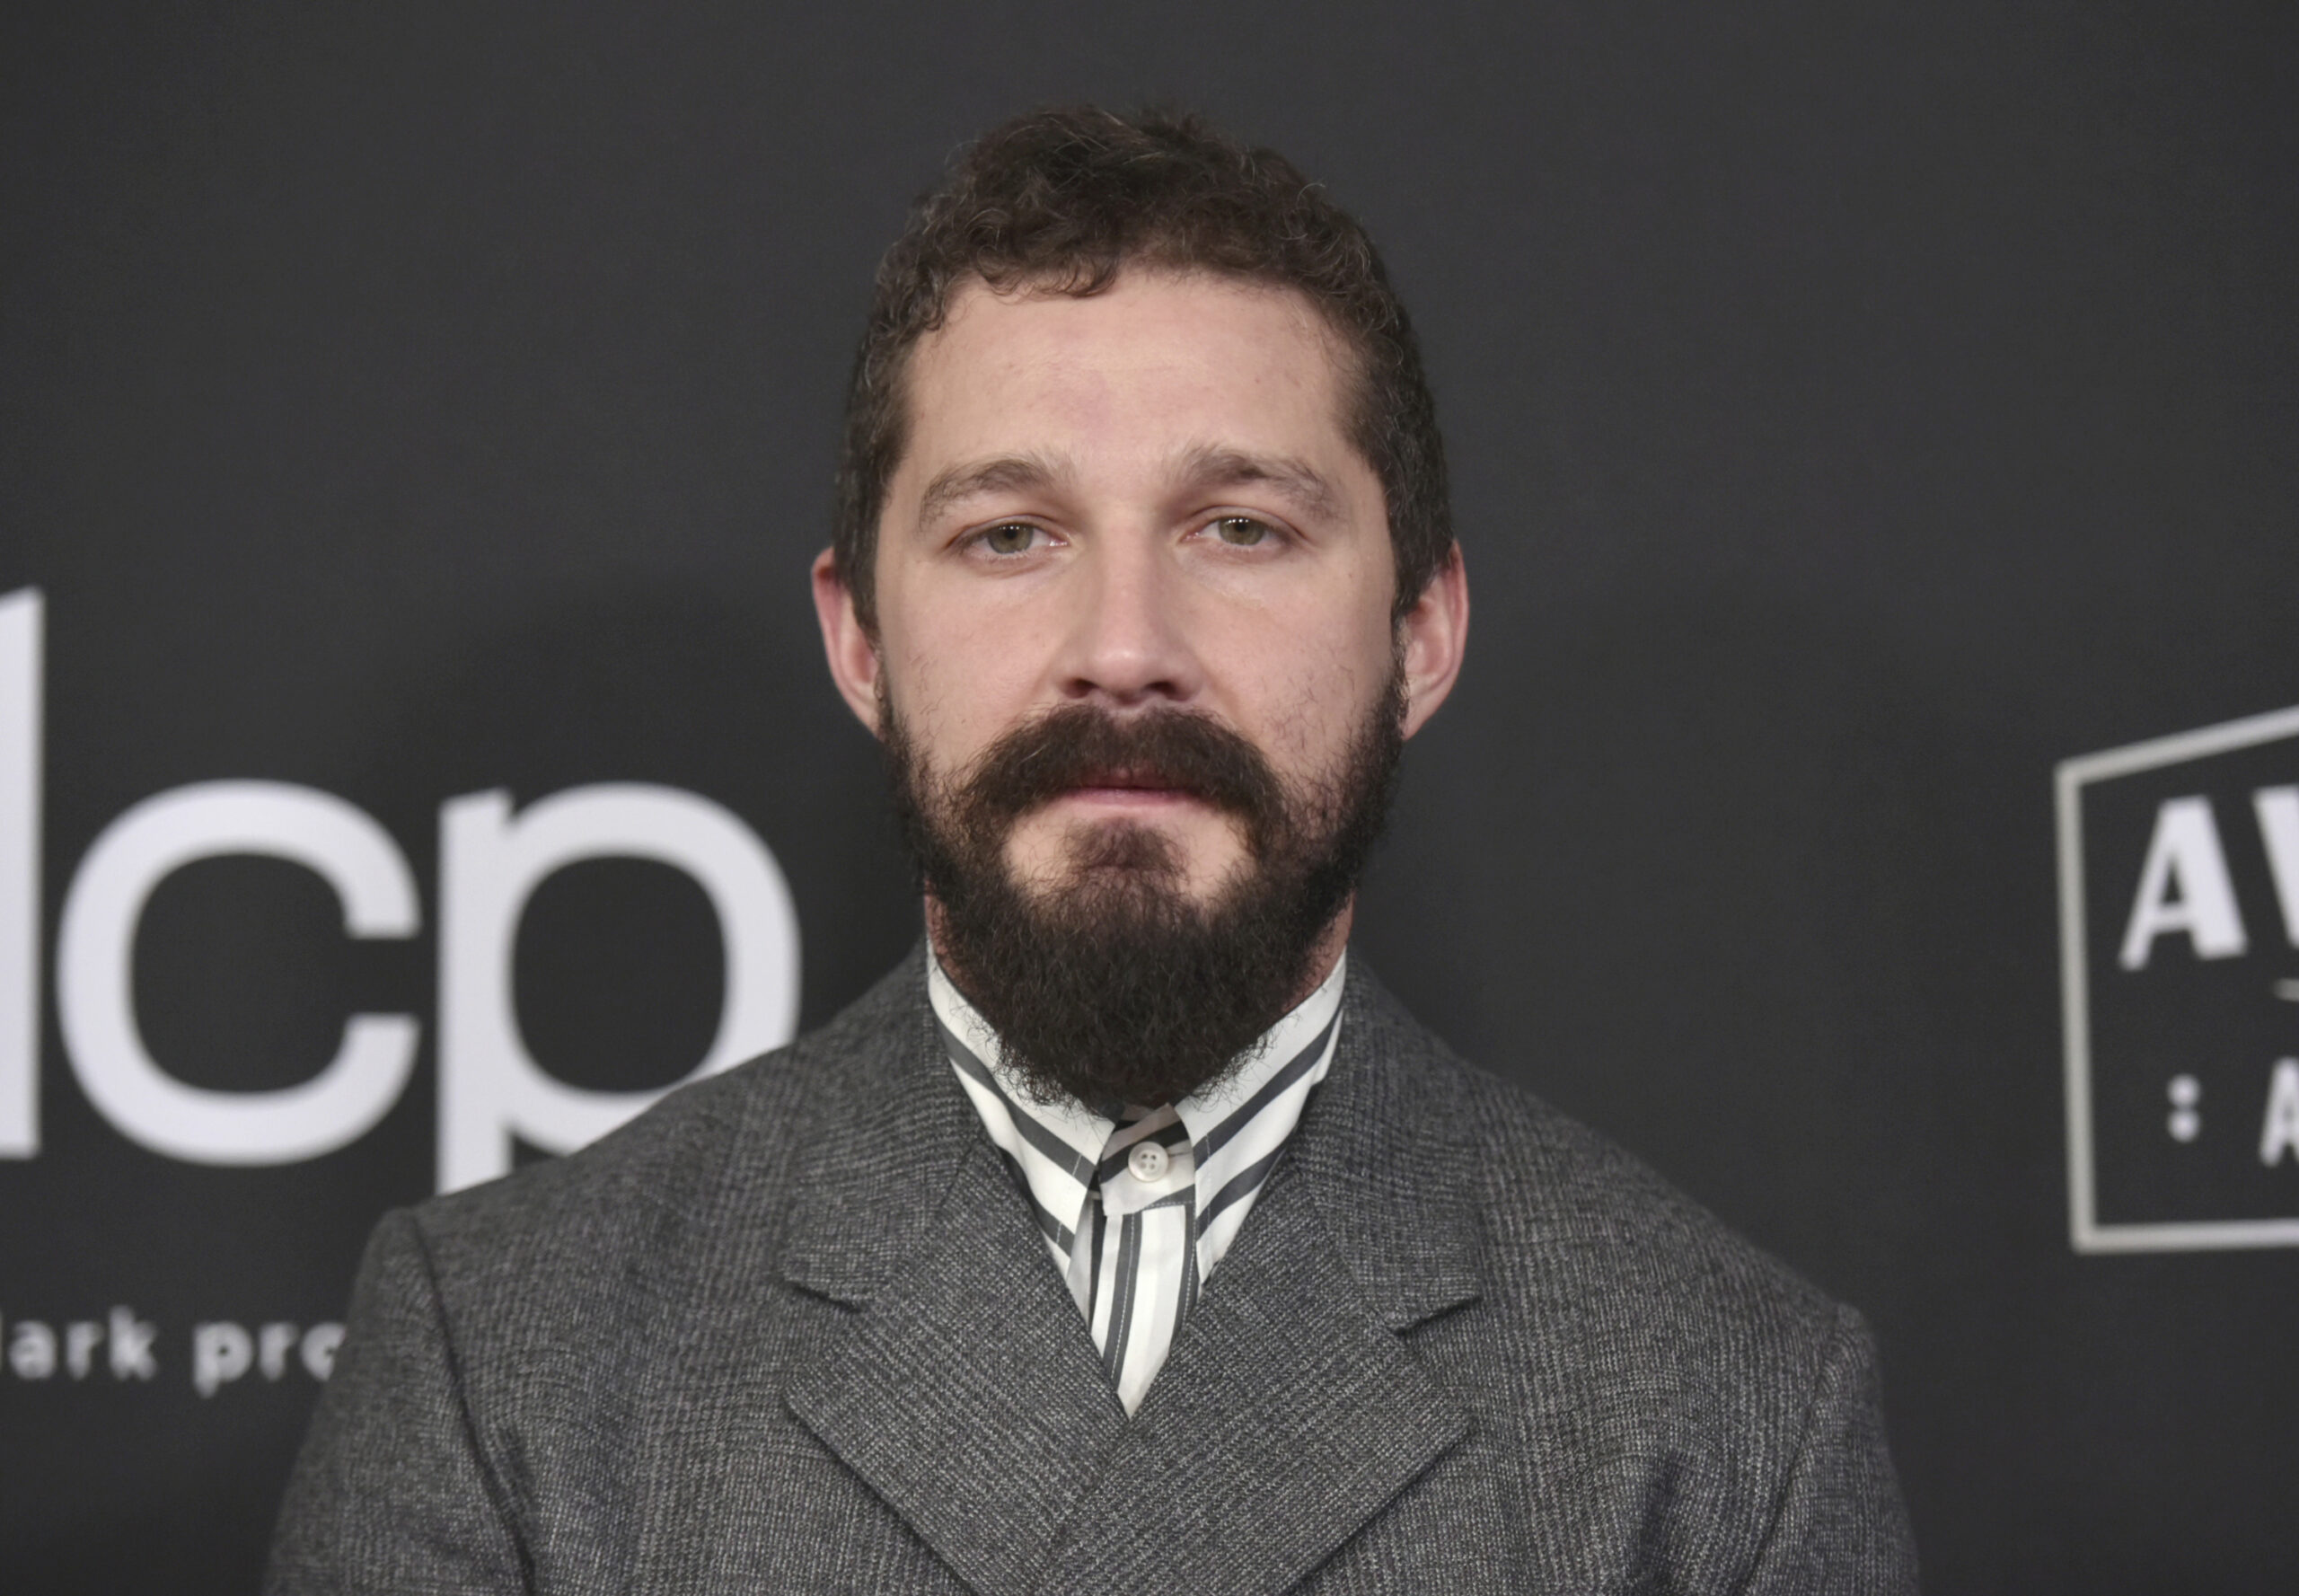 FILE - In this Nov. 3, 2019, file photo, Shia LaBeouf arrives at the 23rd annual Hollywood Film Awards at the Beverly Hilton Hotel in Beverly Hills, Calif. LaBeouf has been charged on Sept. 24, 2020, with misdemeanor battery and petty theft. Prosecutors allege that the 34-year-old actor fought with a man named Tyler Murphy and took his hat on June 12, according to a criminal complaint obtained by The Associated Press on Thursday, Oct. 1, from the Los Angeles city attorney. (Photo by Richard Shotwell/Invision/AP, File)